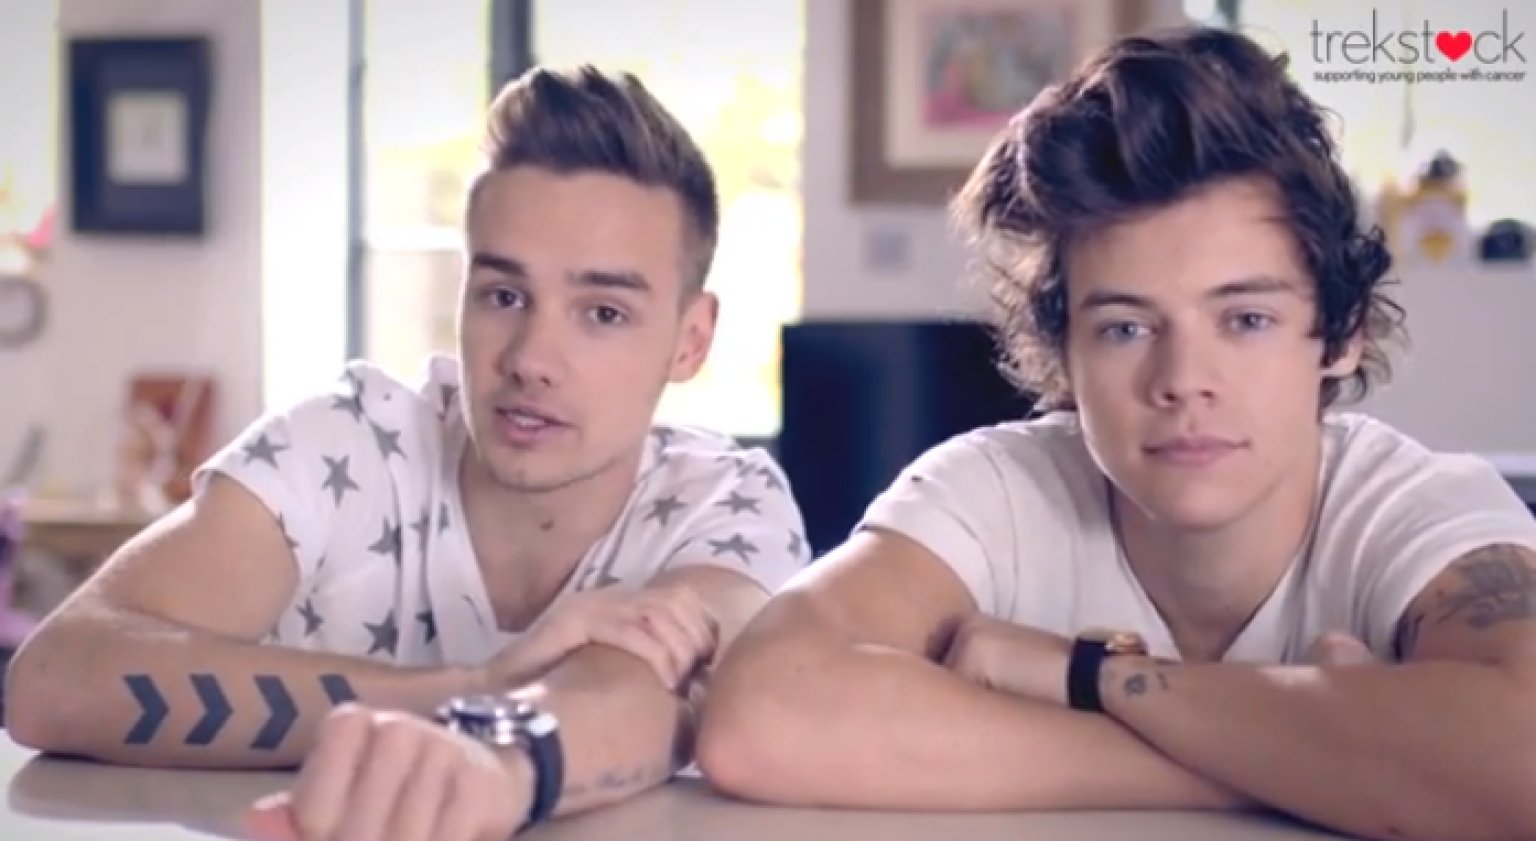 Liam Payne And Harry Styles Fight Cancer Boy Band Members Team Up To